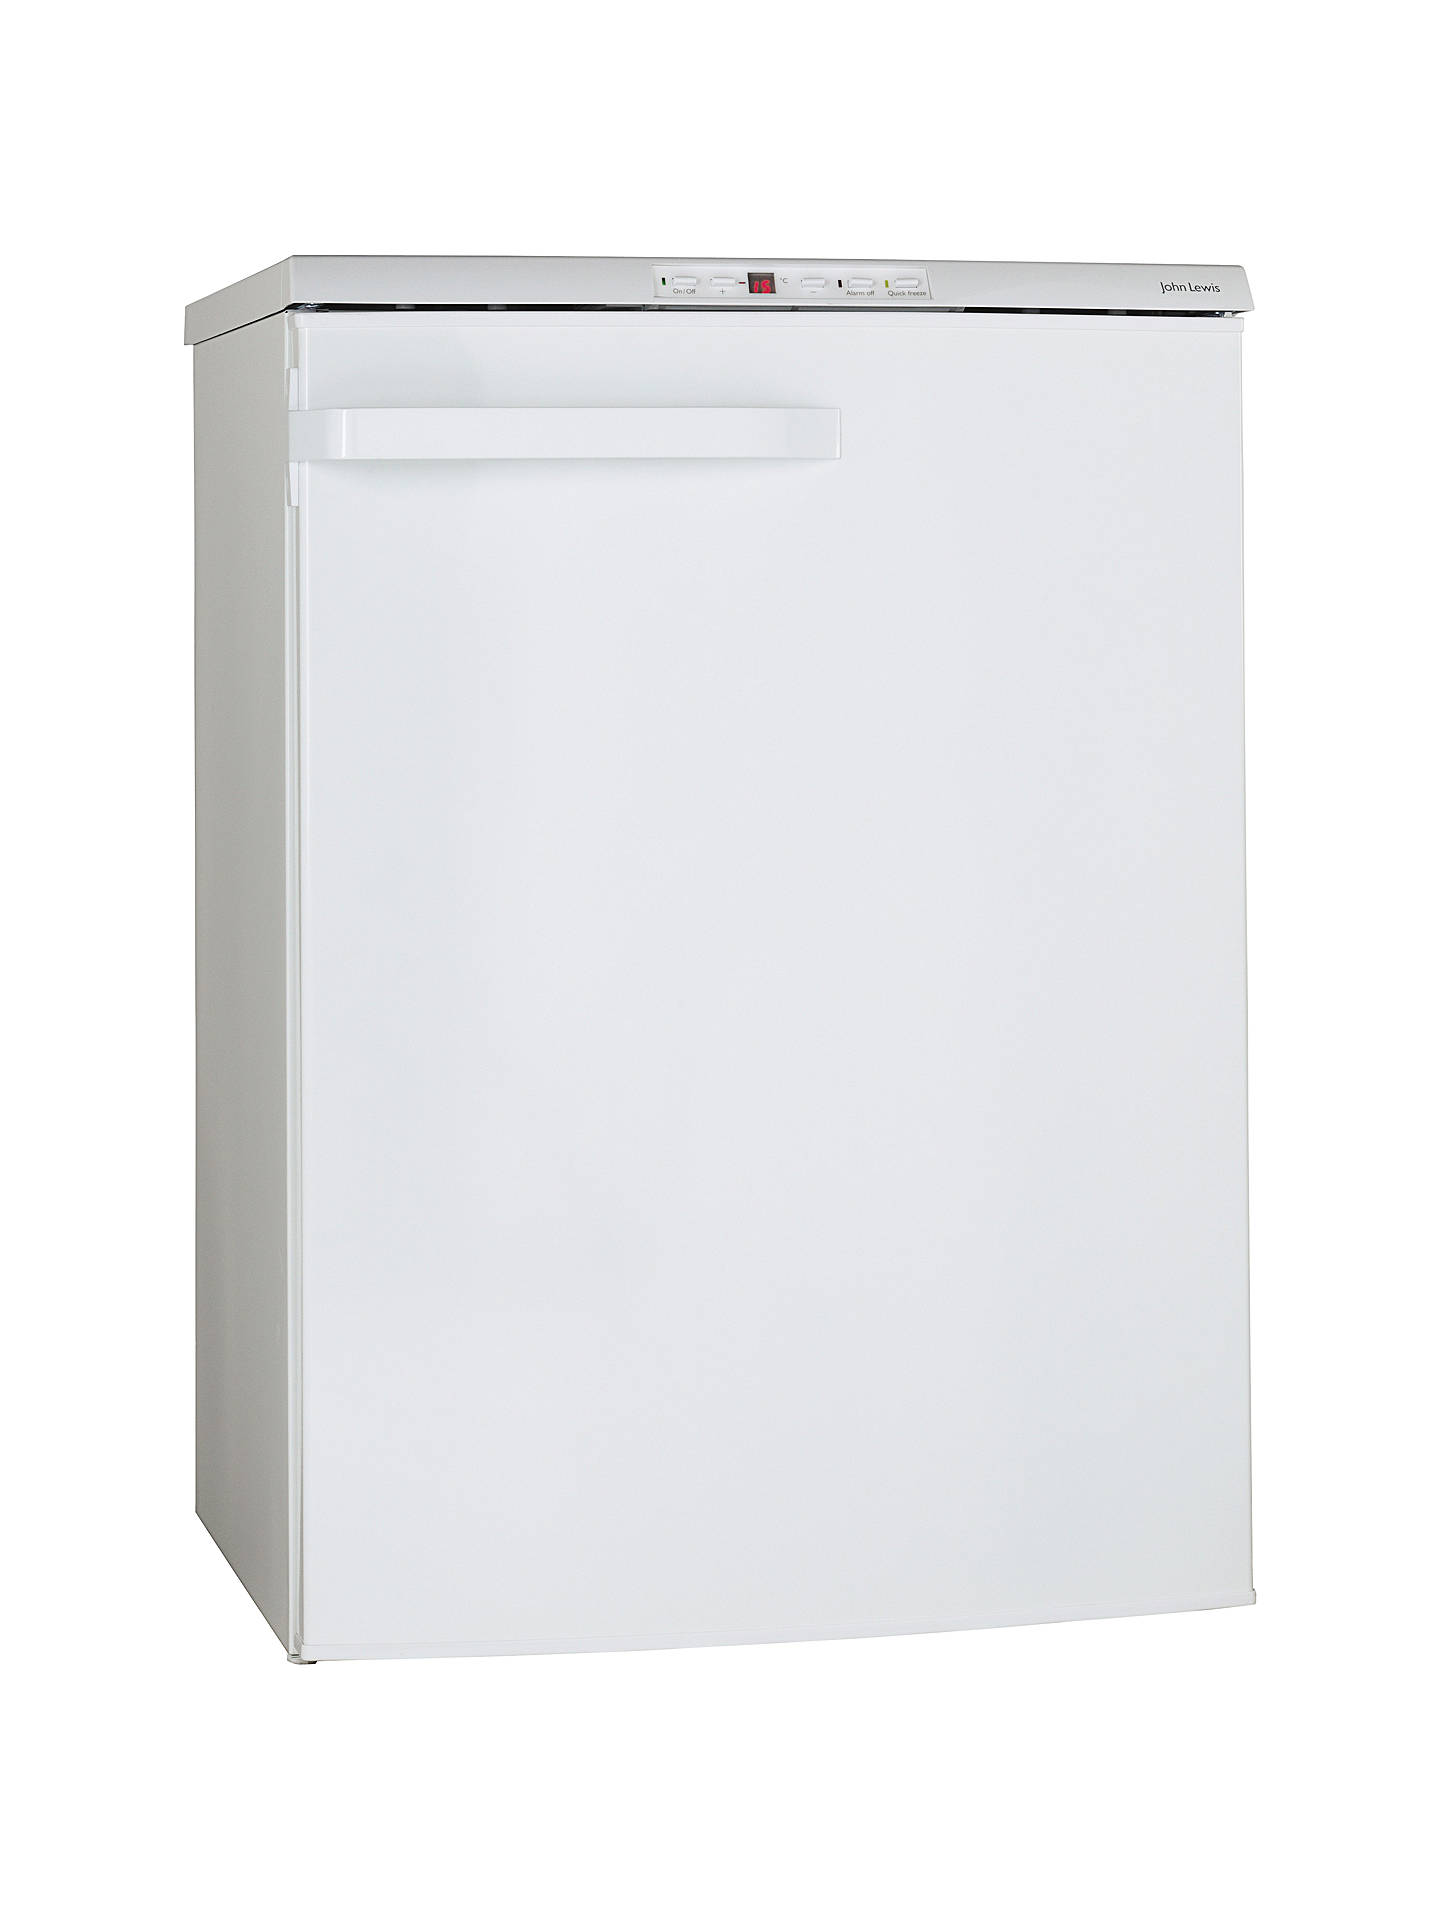 John Lewis & Partners JLUCFZW614 Frost Free Freezer A Energy Rating 60cm Wide White